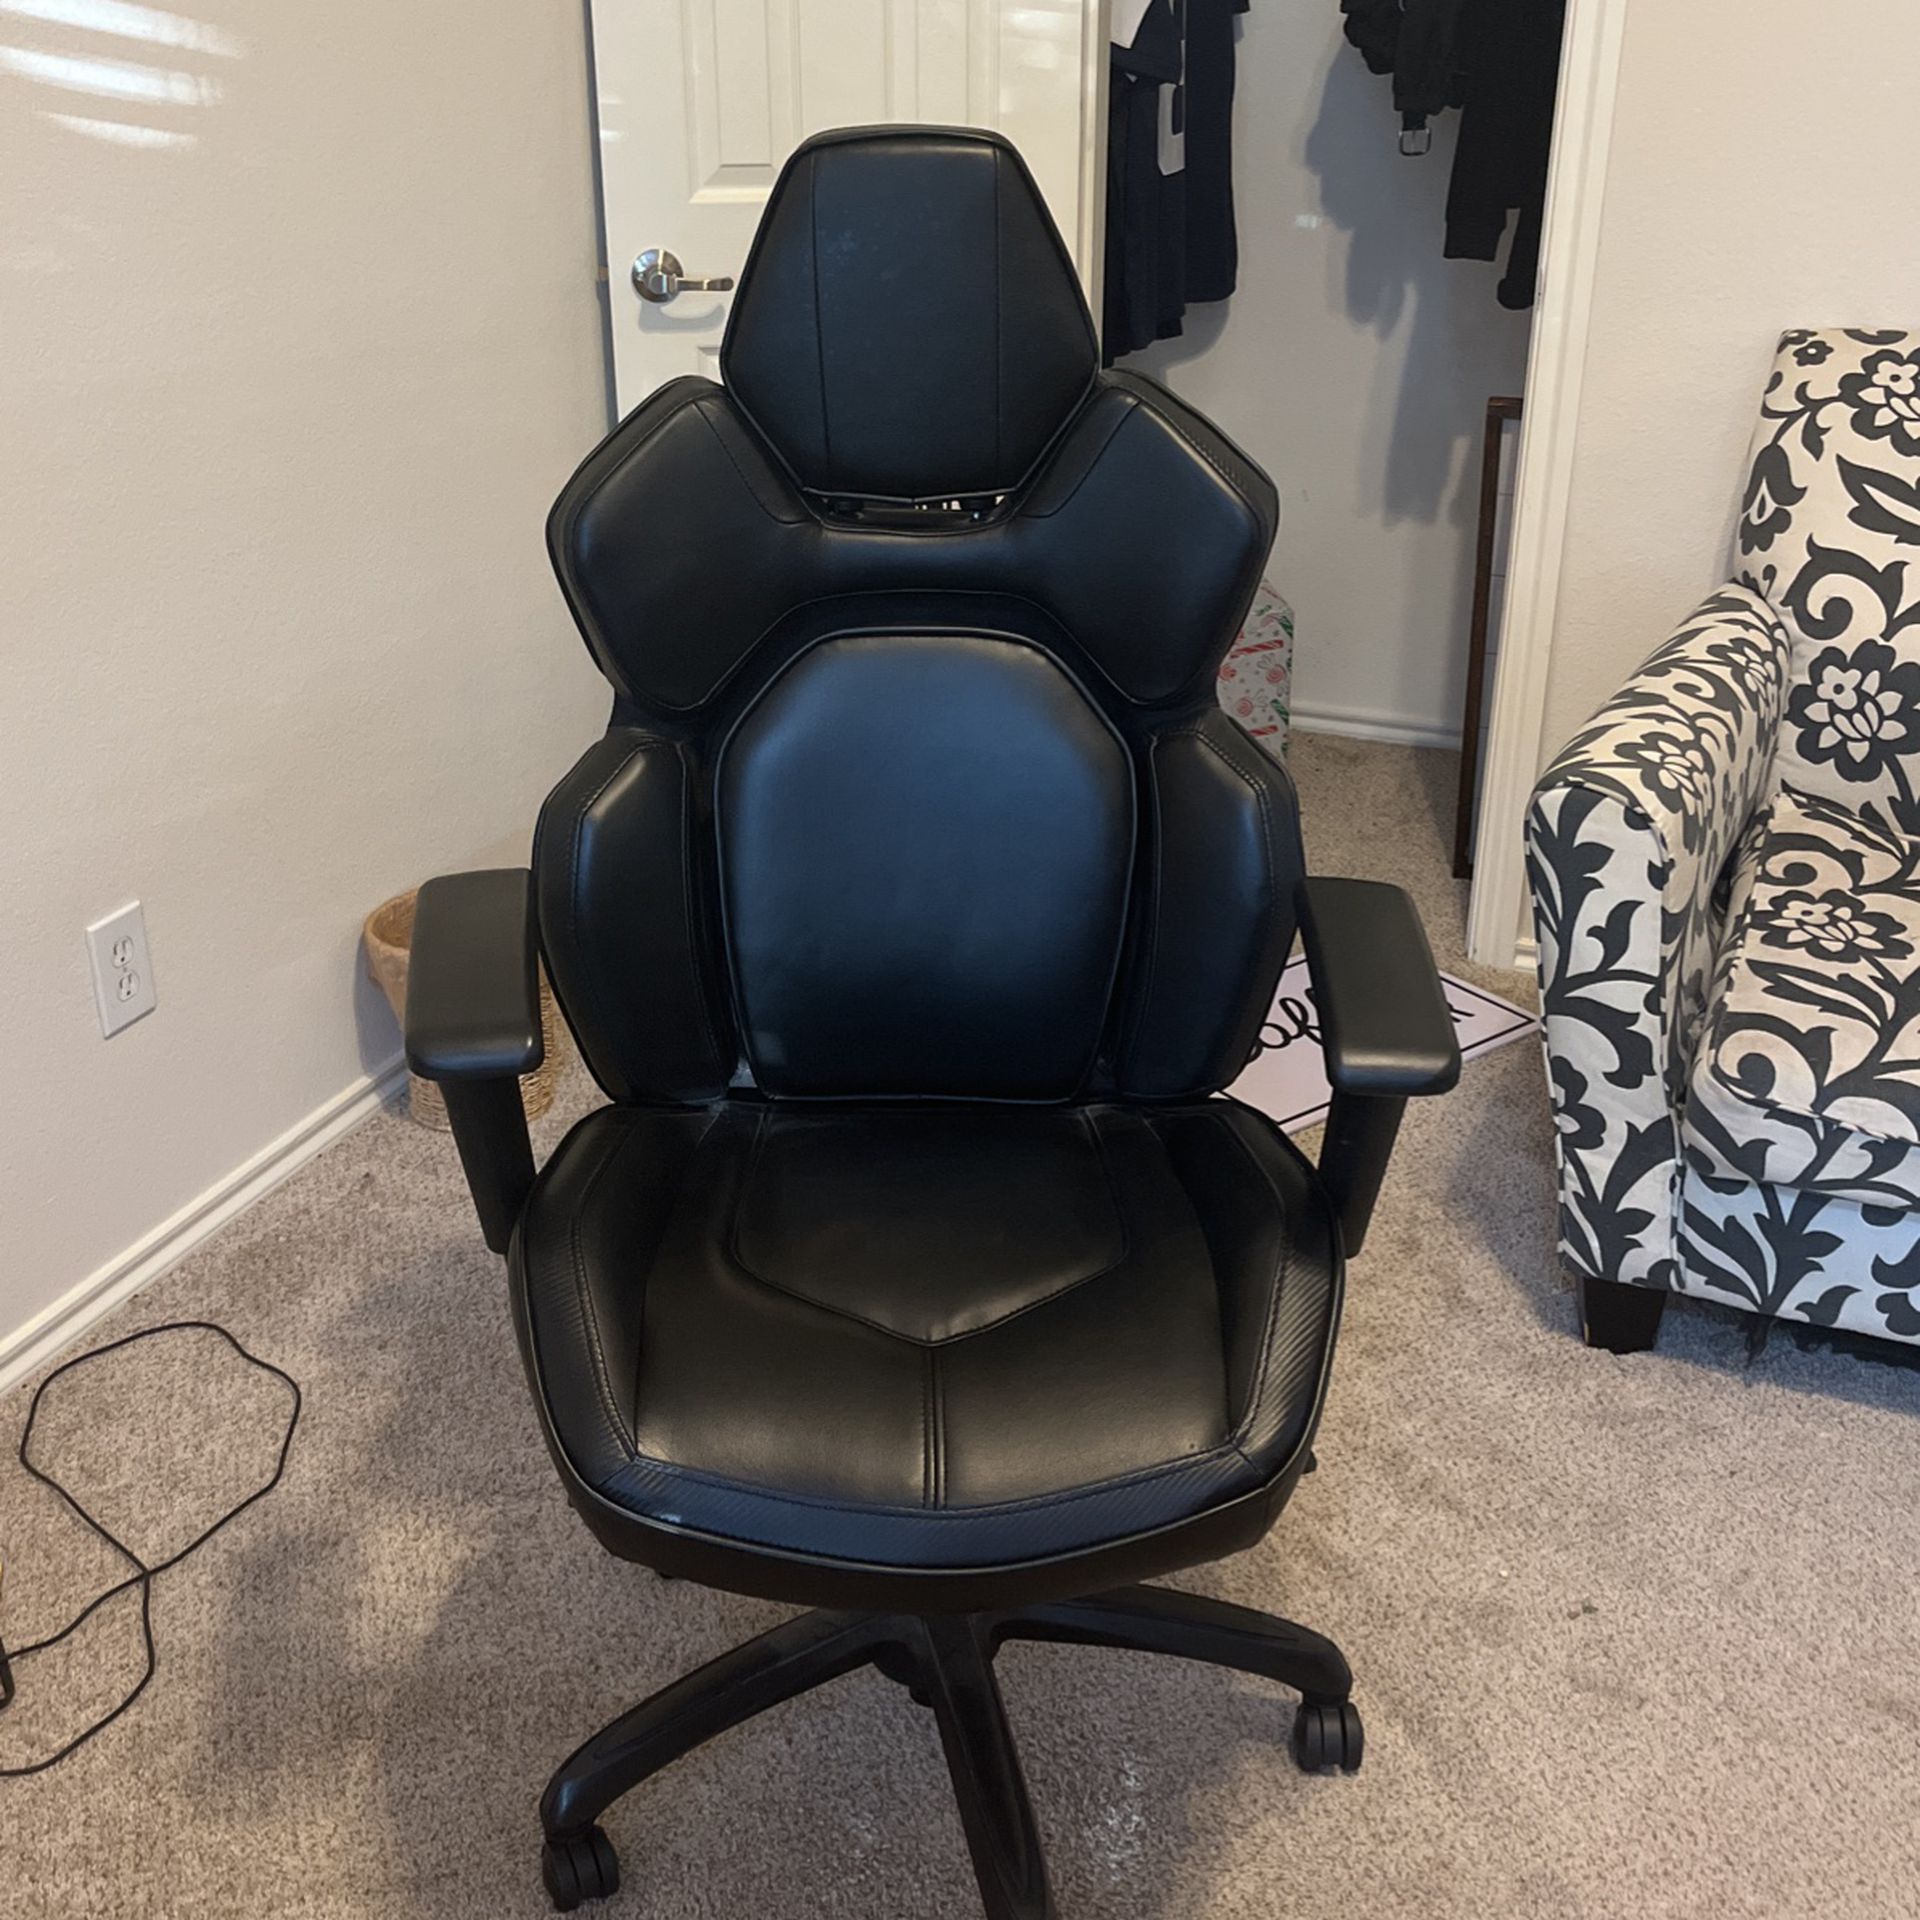 Like new! Office chair For sale! 